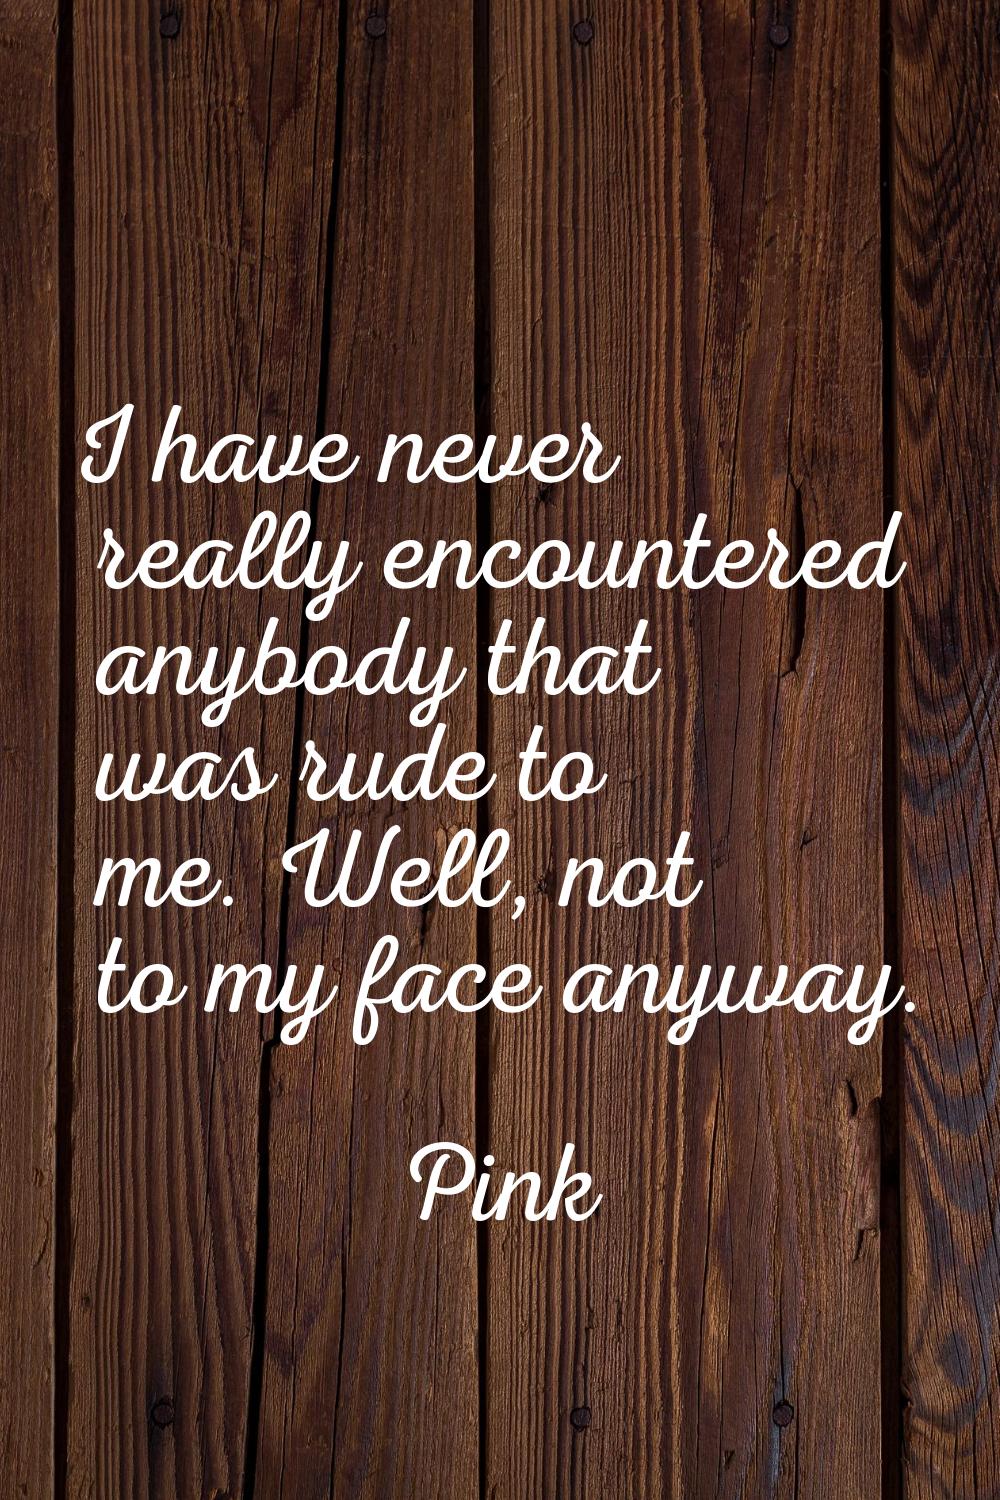 I have never really encountered anybody that was rude to me. Well, not to my face anyway.